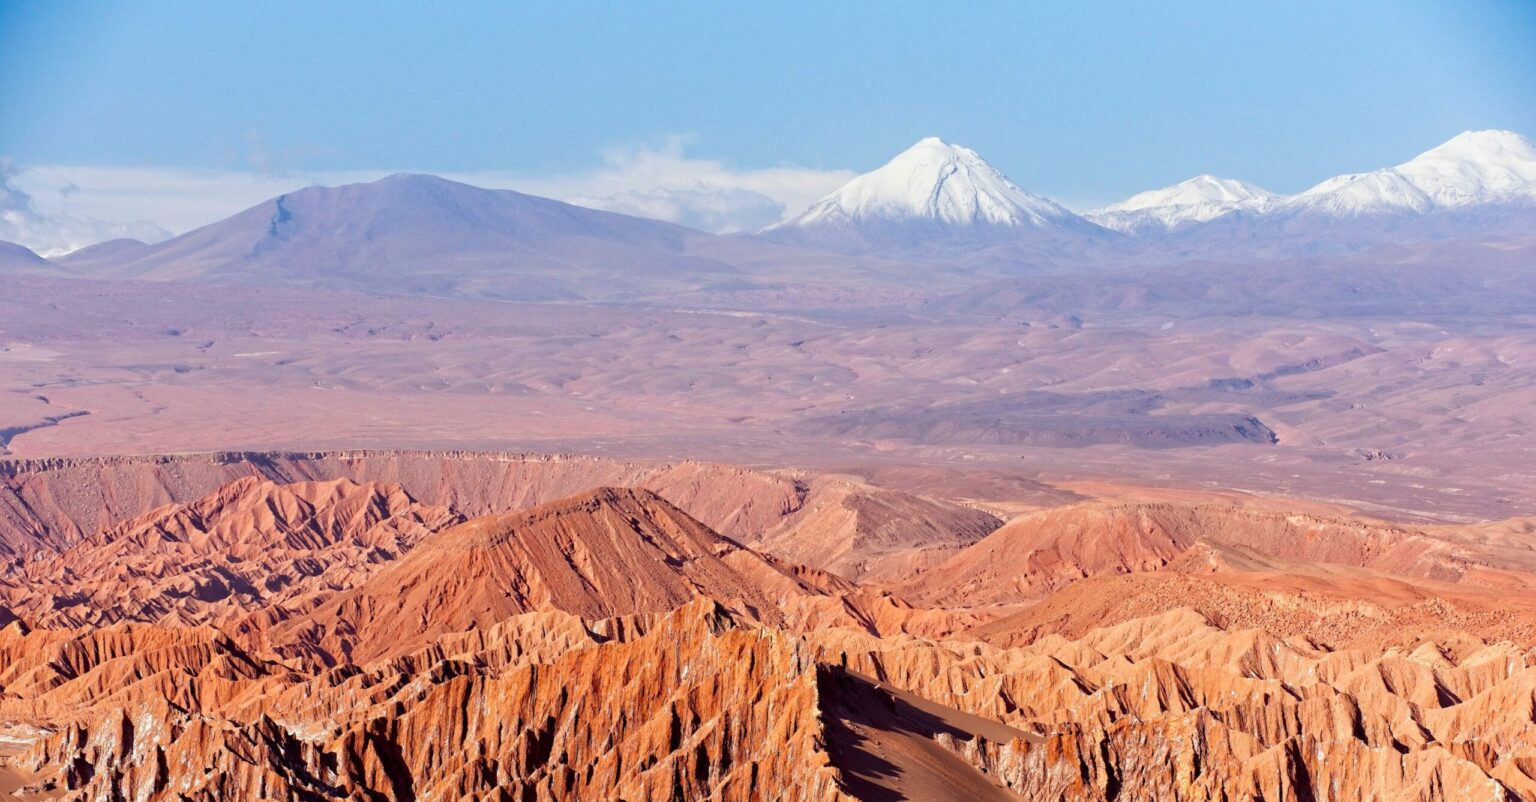 Mountain Landscape of Chile